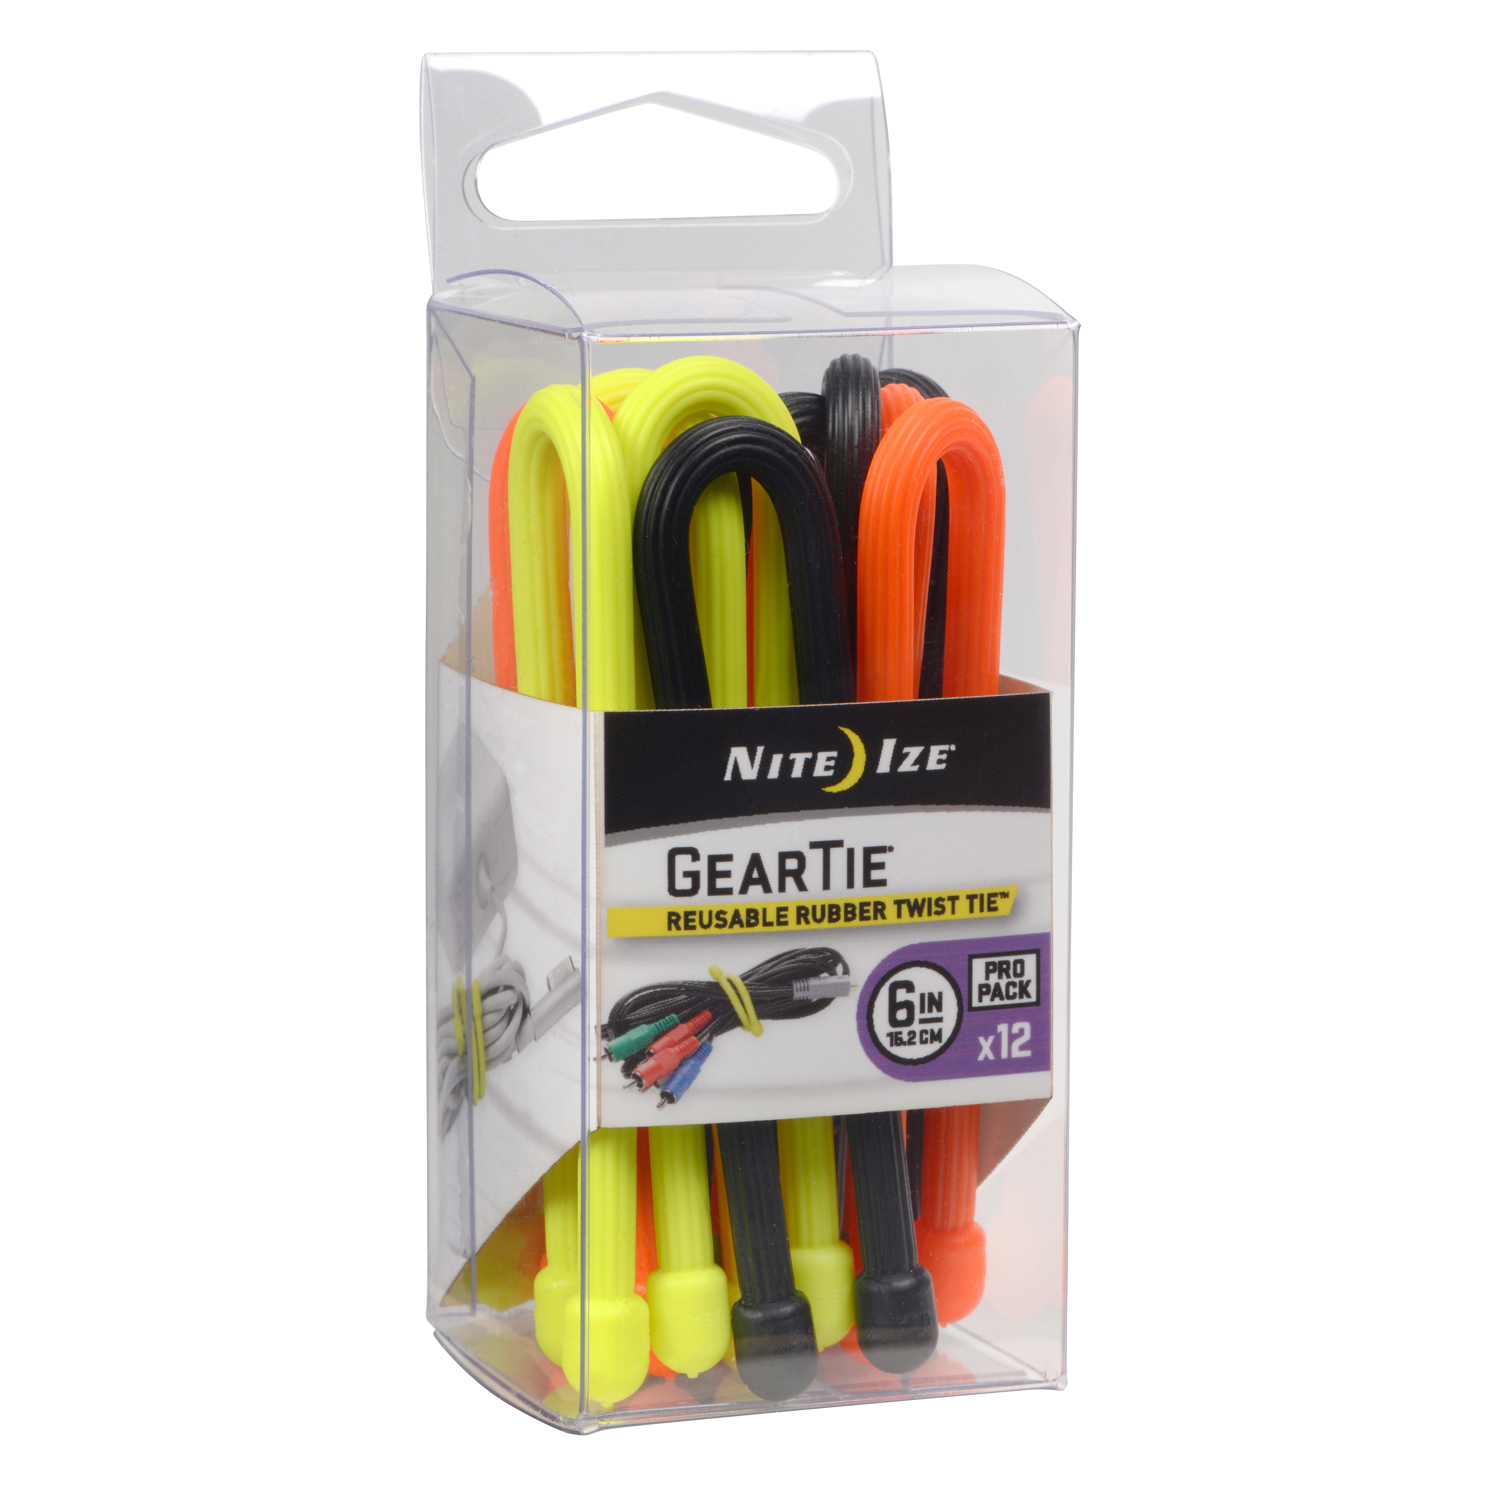 Gear Tie ProPack 6" Assorted 12 Pack